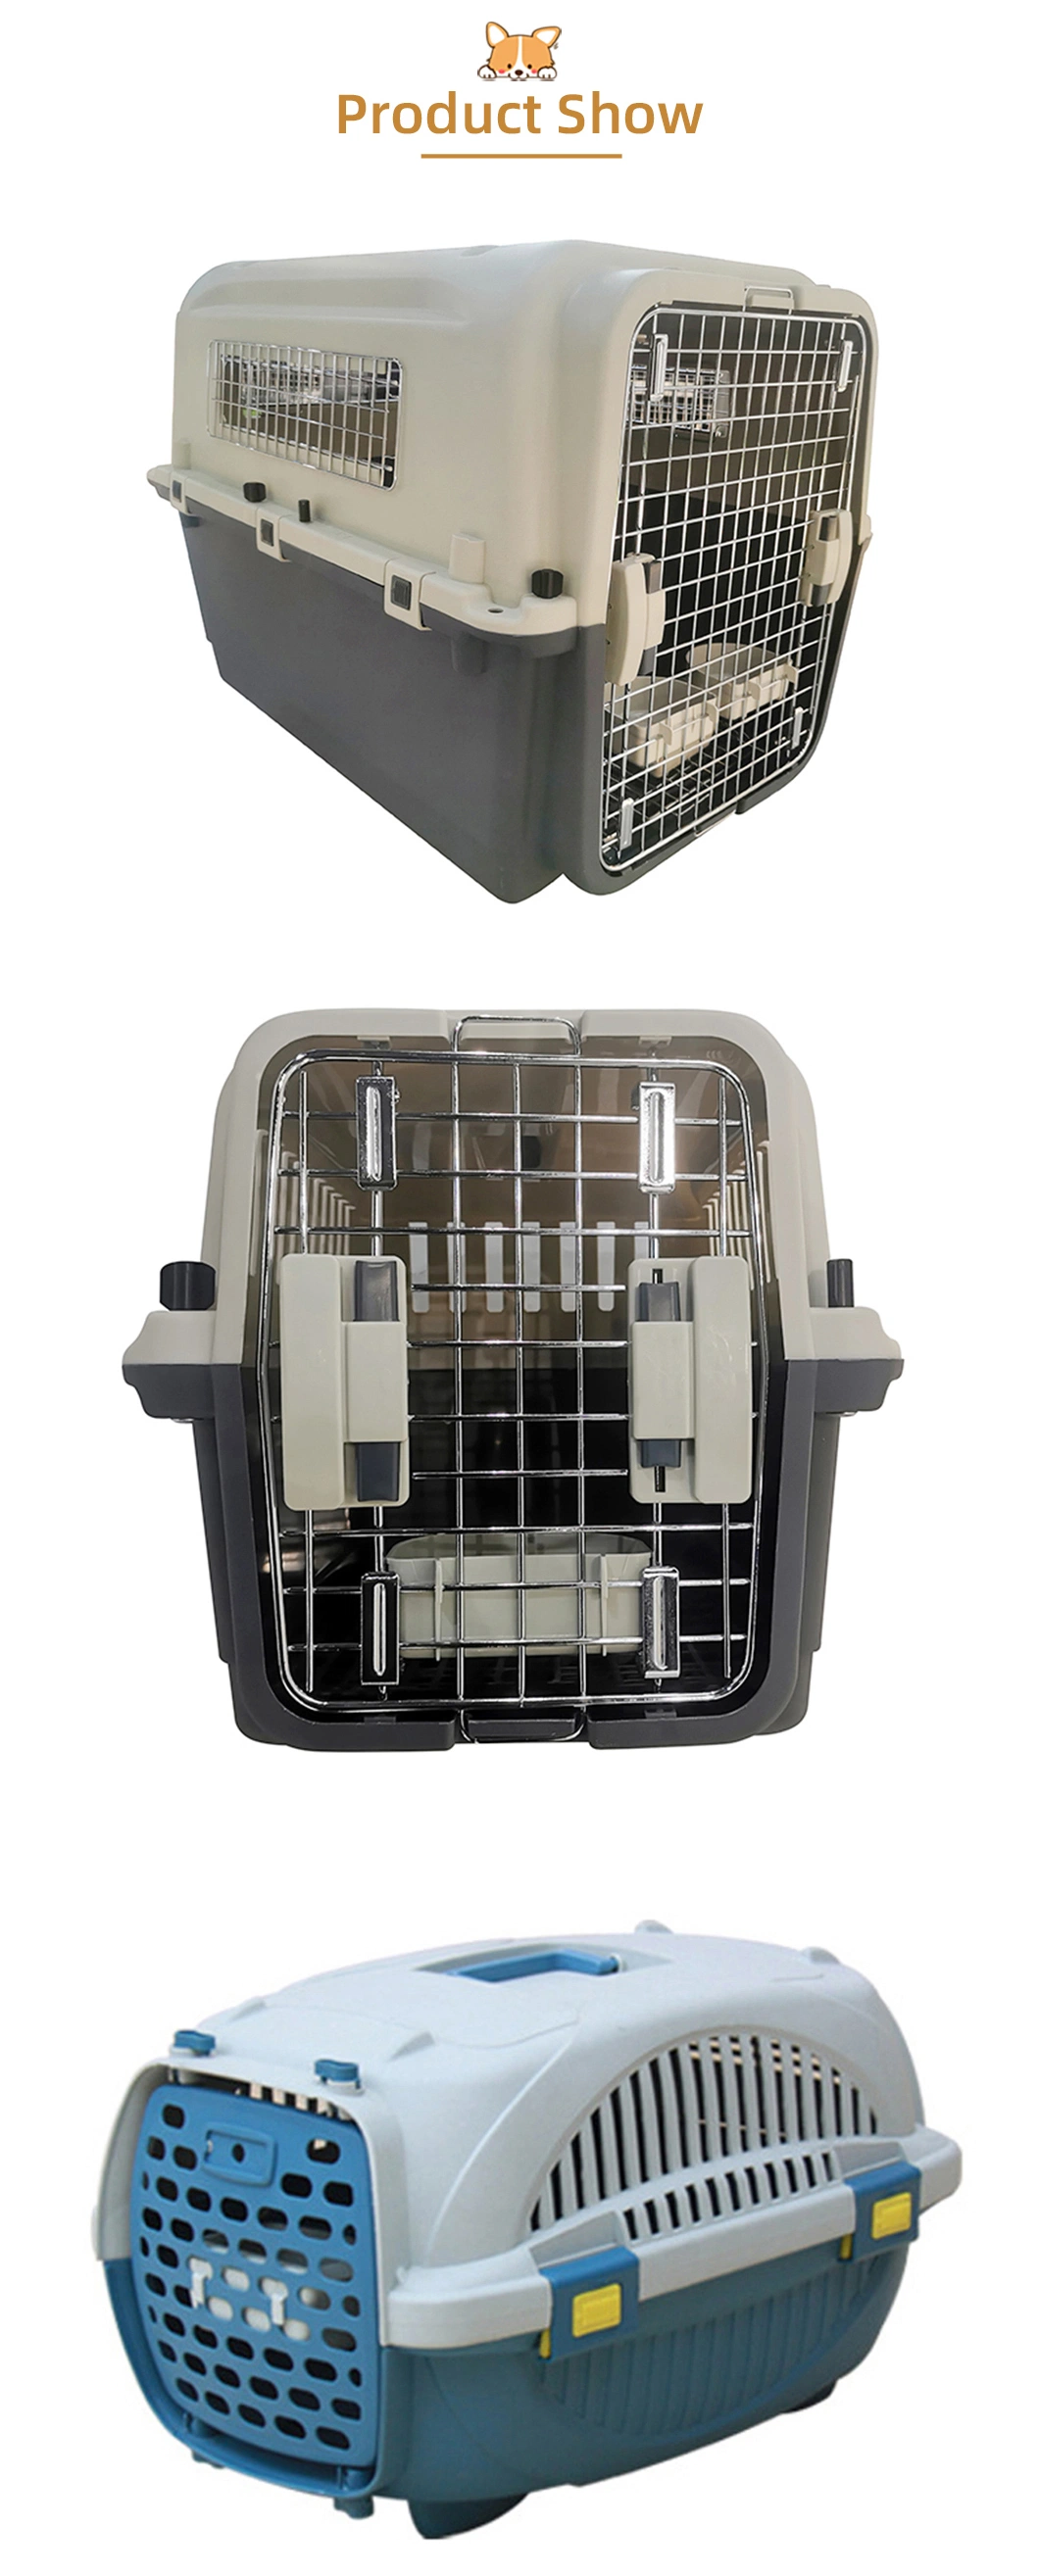 Wholesale Transportation of Travel Pet Kennels Dog and Cat Carriers Portable Travel Pet Kennels Approved by Airlines